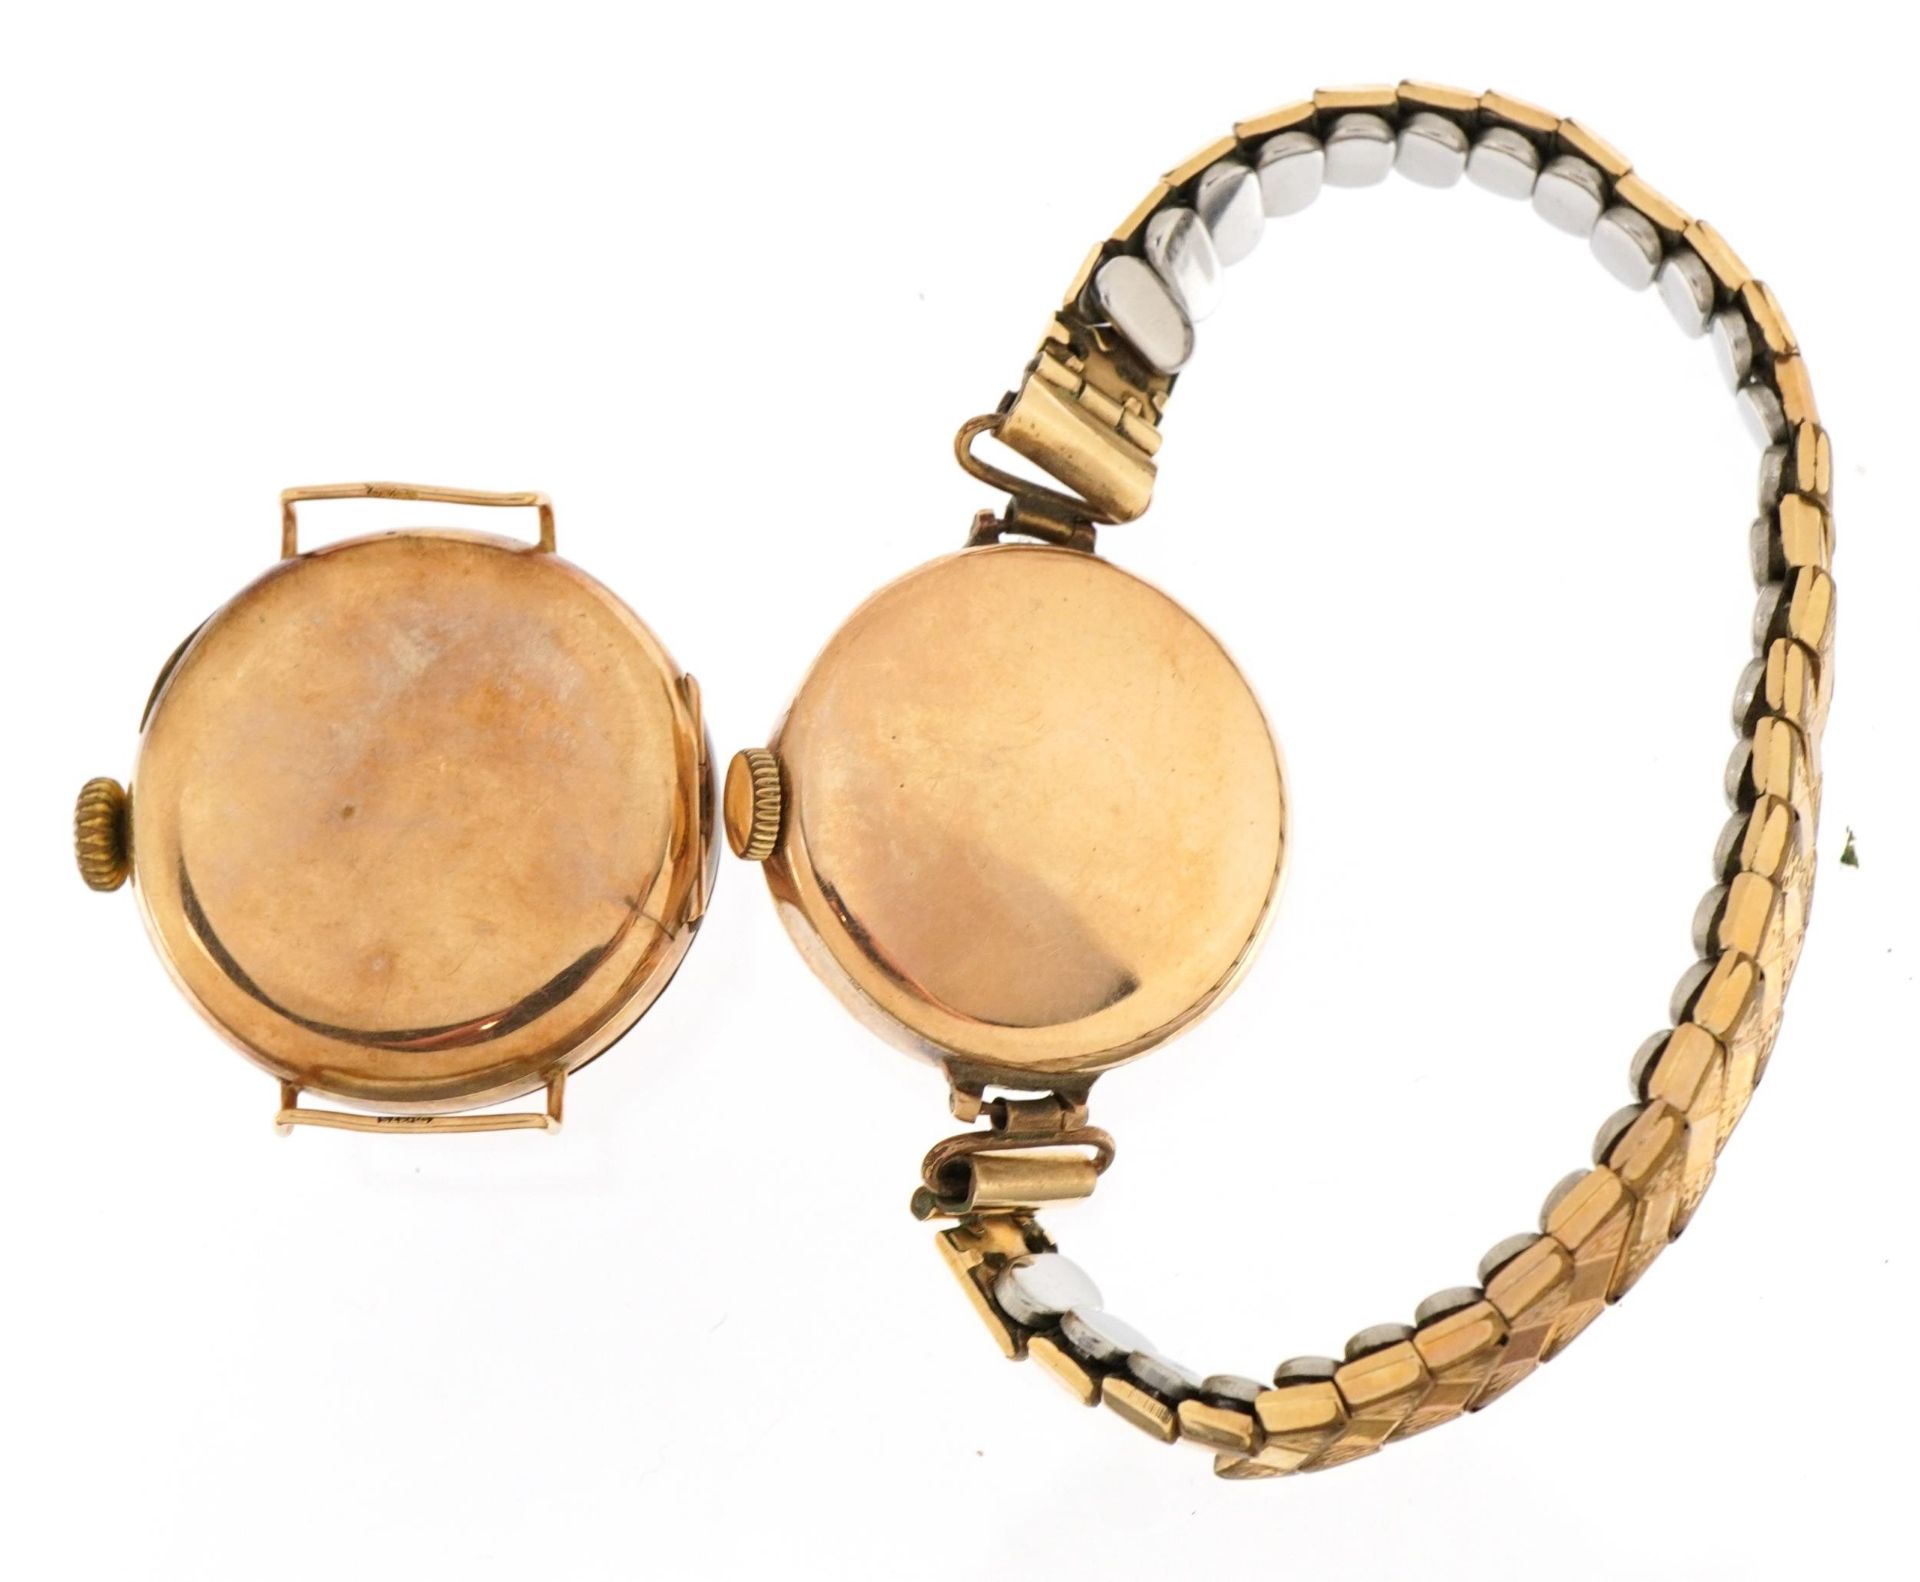 Two 9ct gold ladies wristwatches, the largest 25mm in diameter - Image 3 of 5